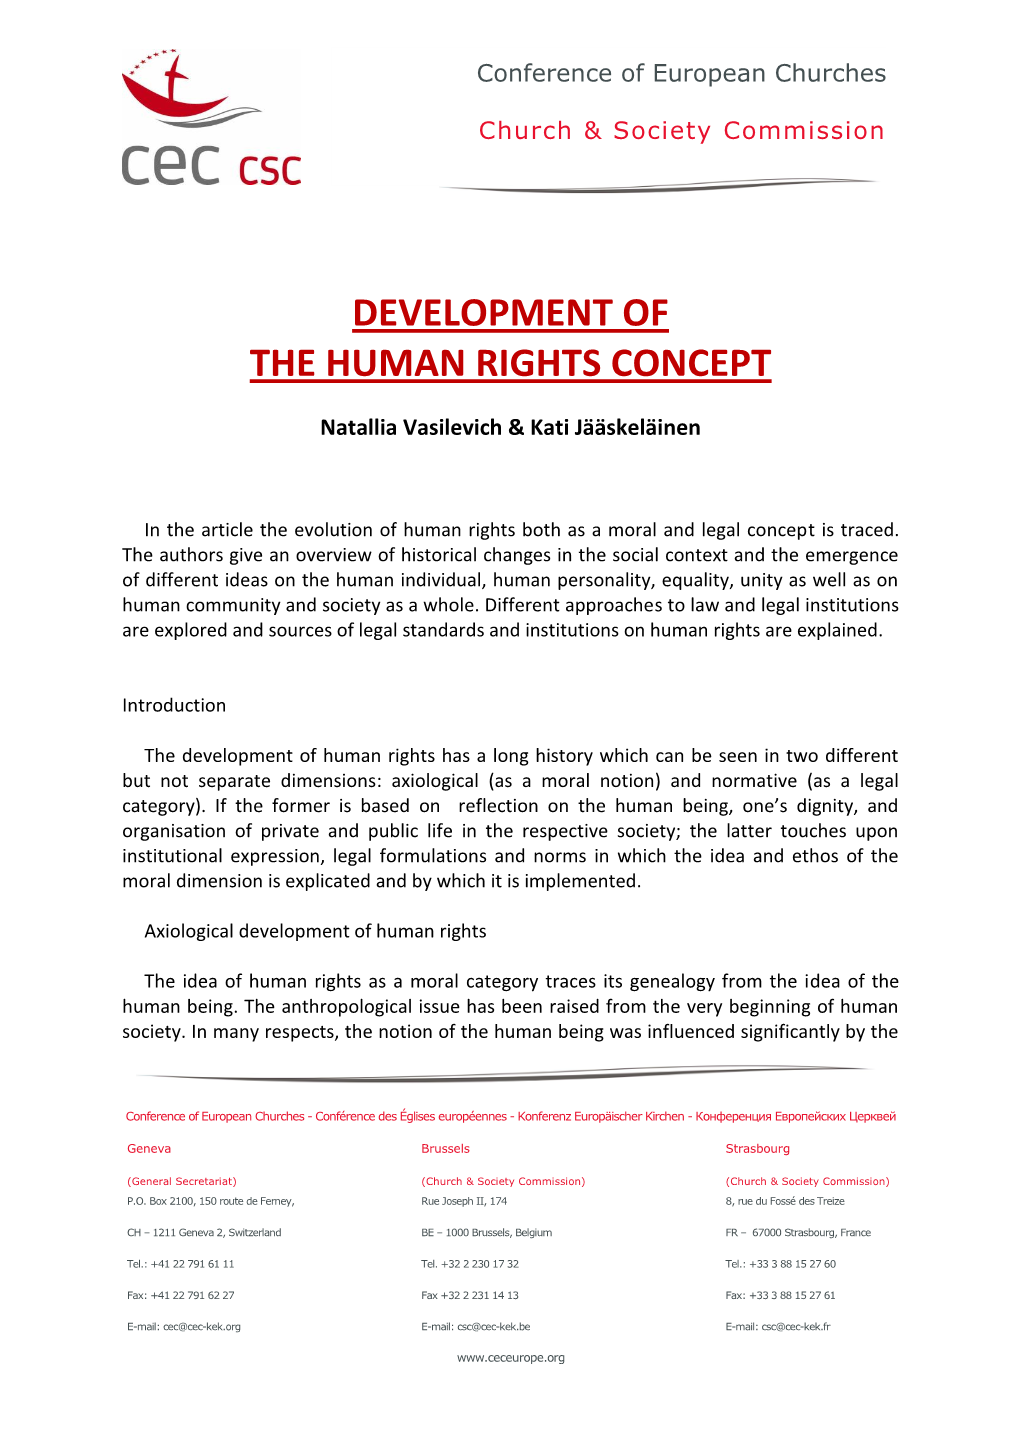 Development of the Human Rights Concept